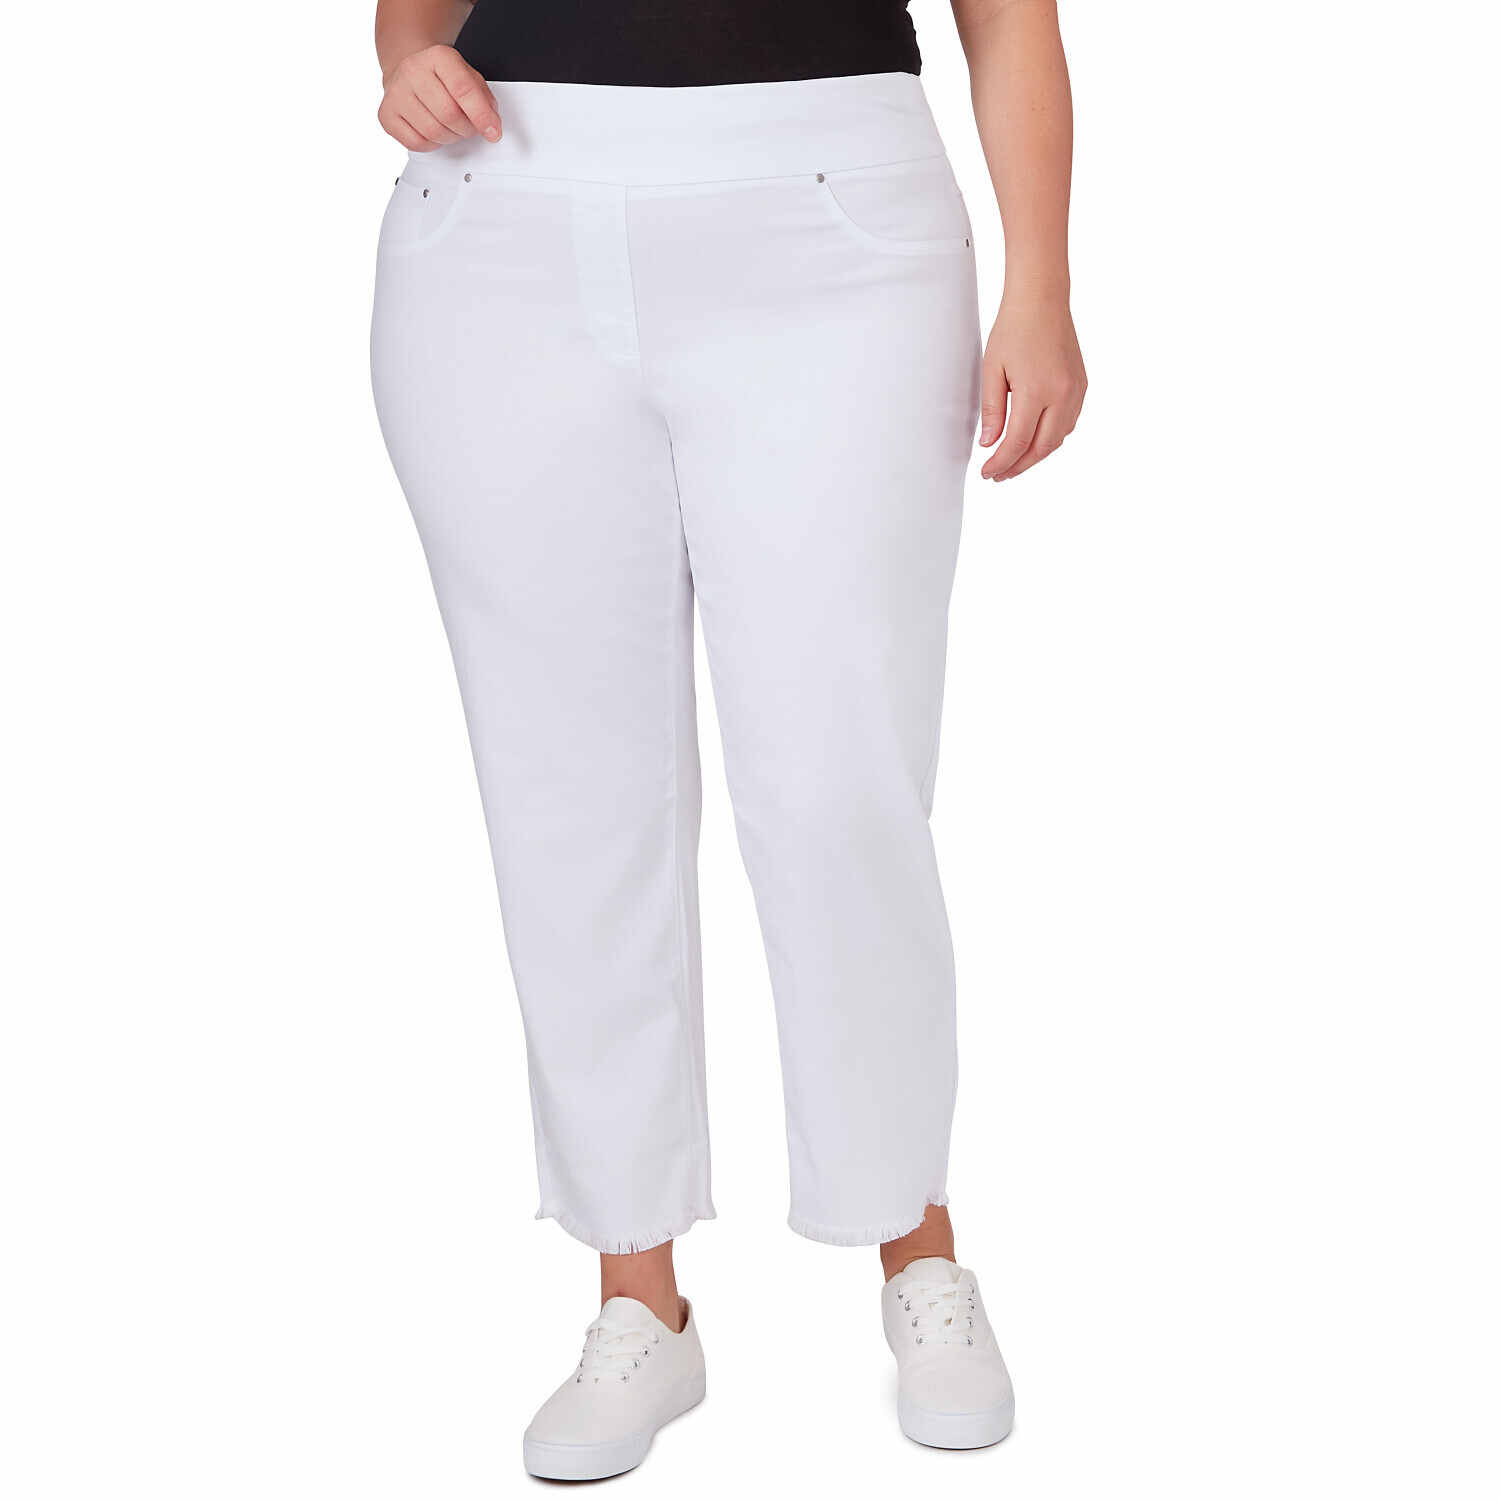 Plus Women's Solid Ponte Pant With Front Slit